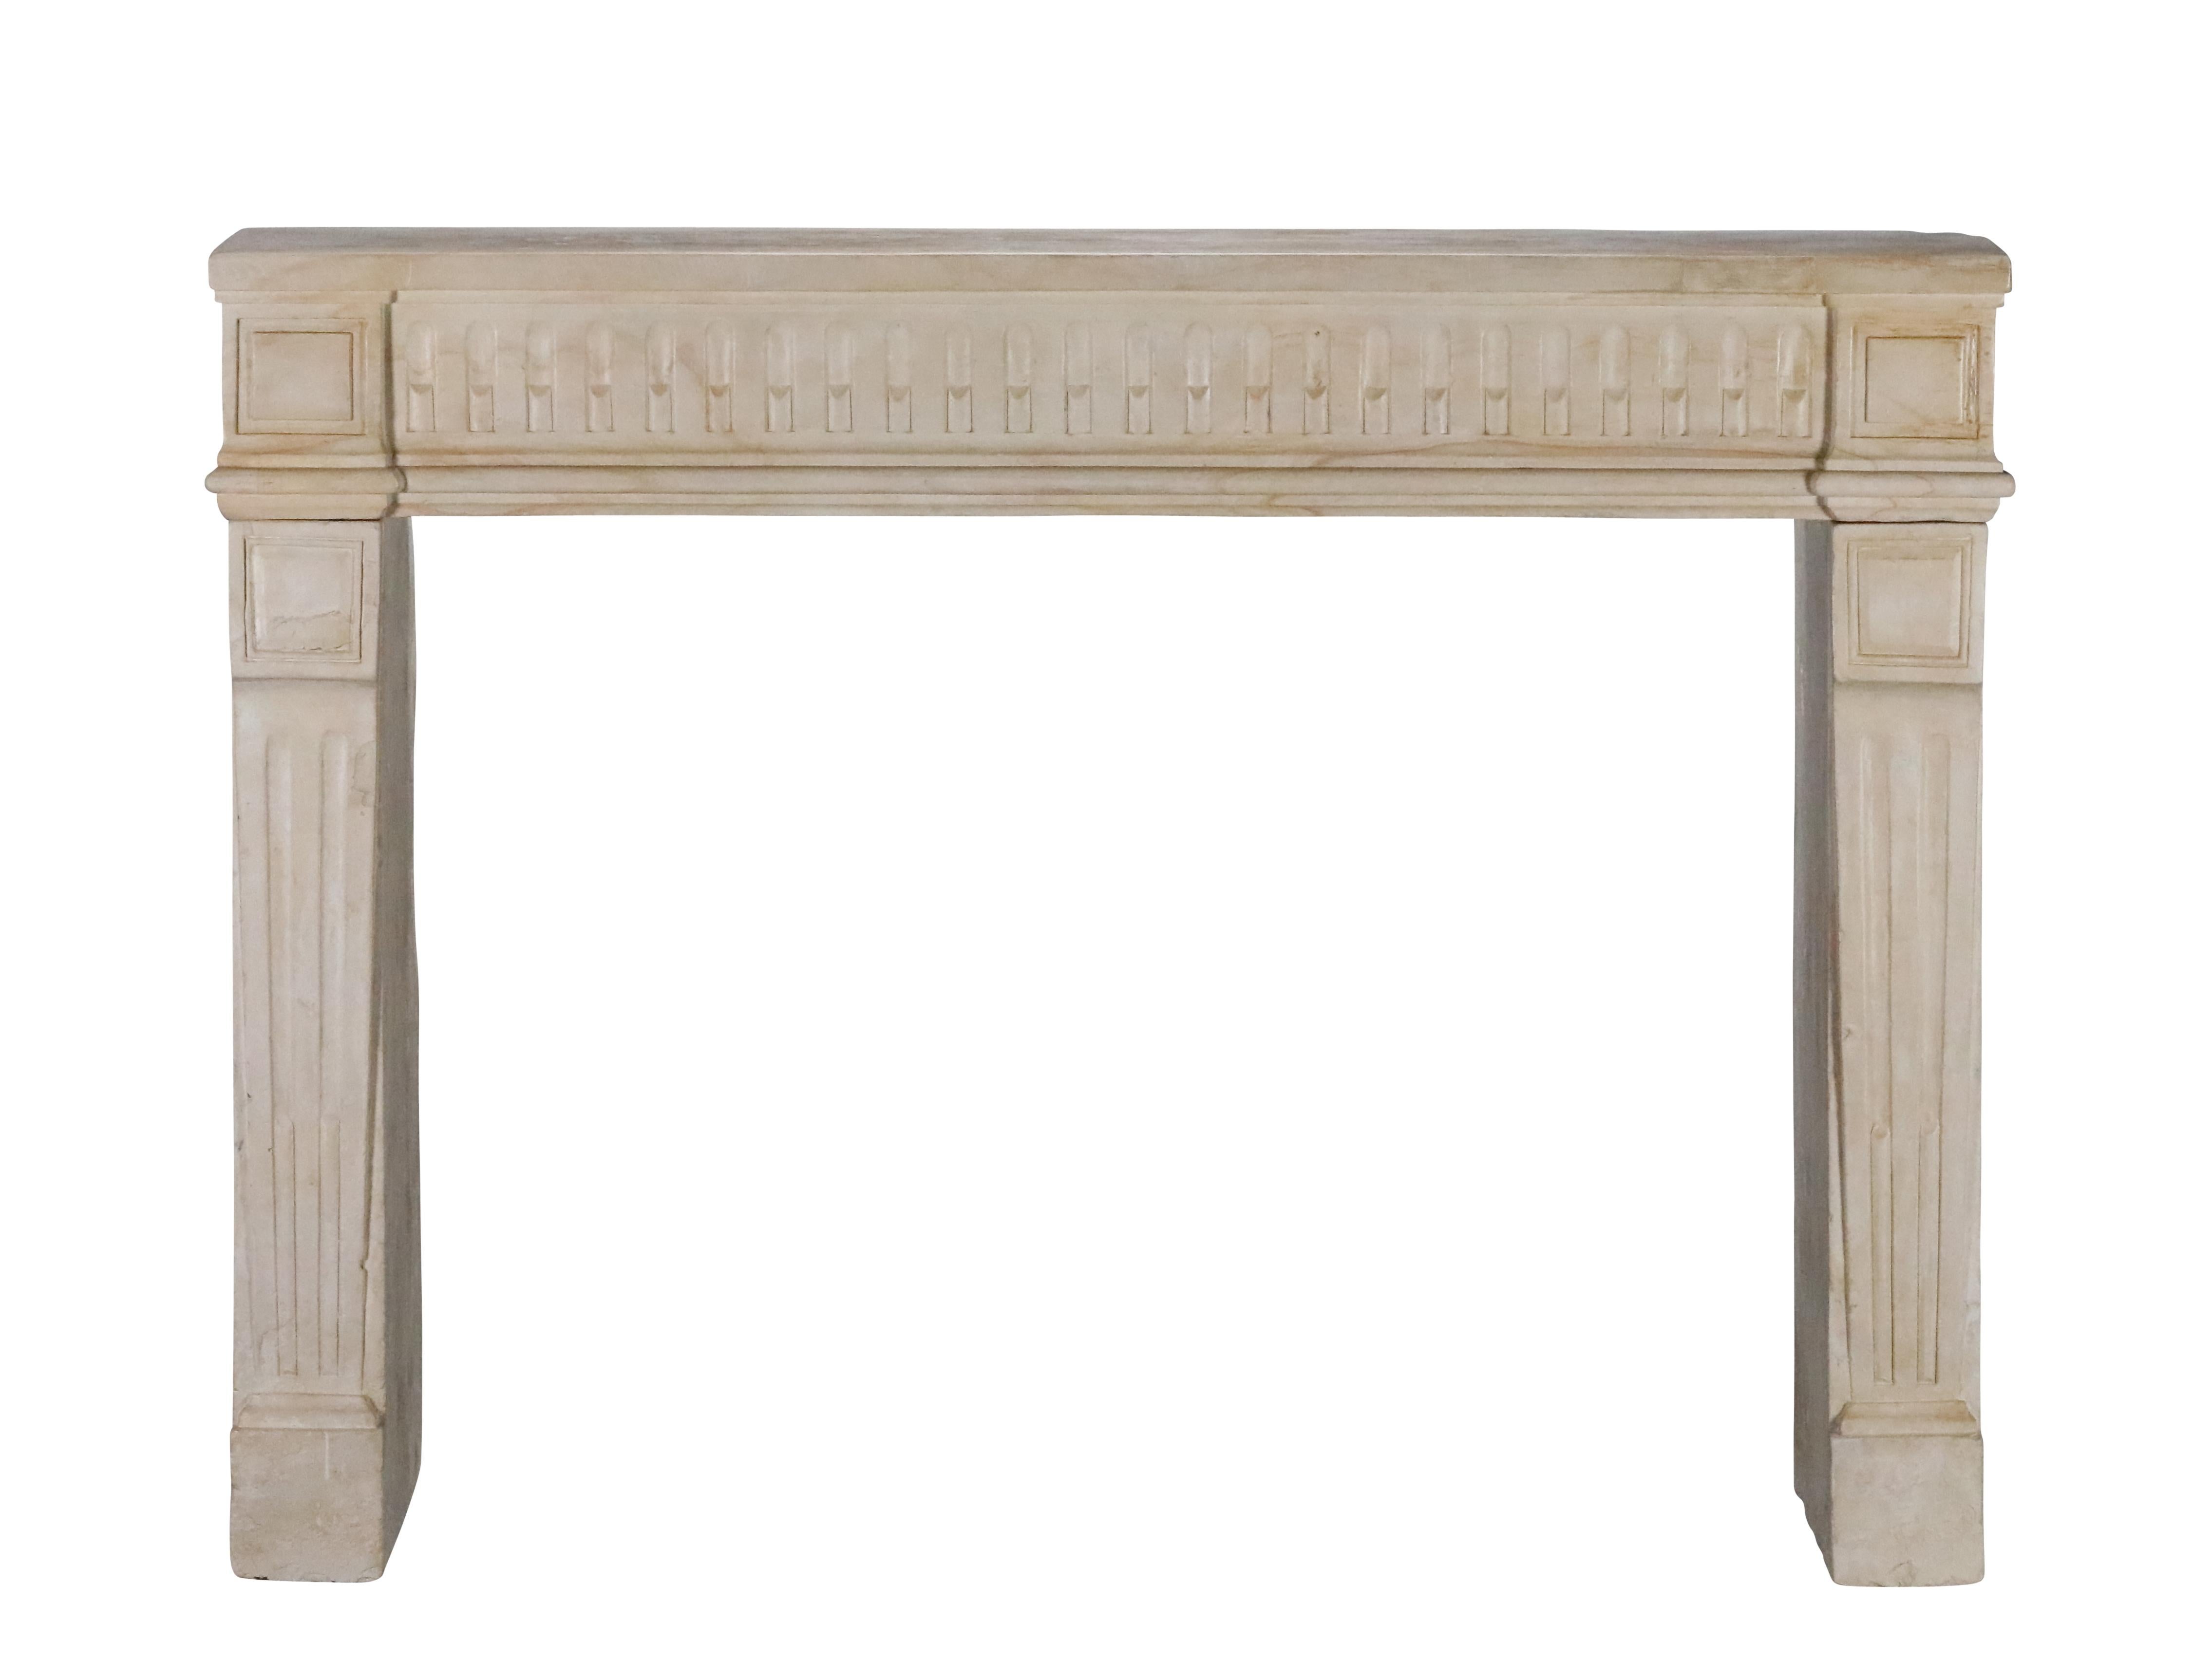 Hand-Carved Classy Chic 18th Century Limestone Fireplace For Exclusive Interior Project For Sale